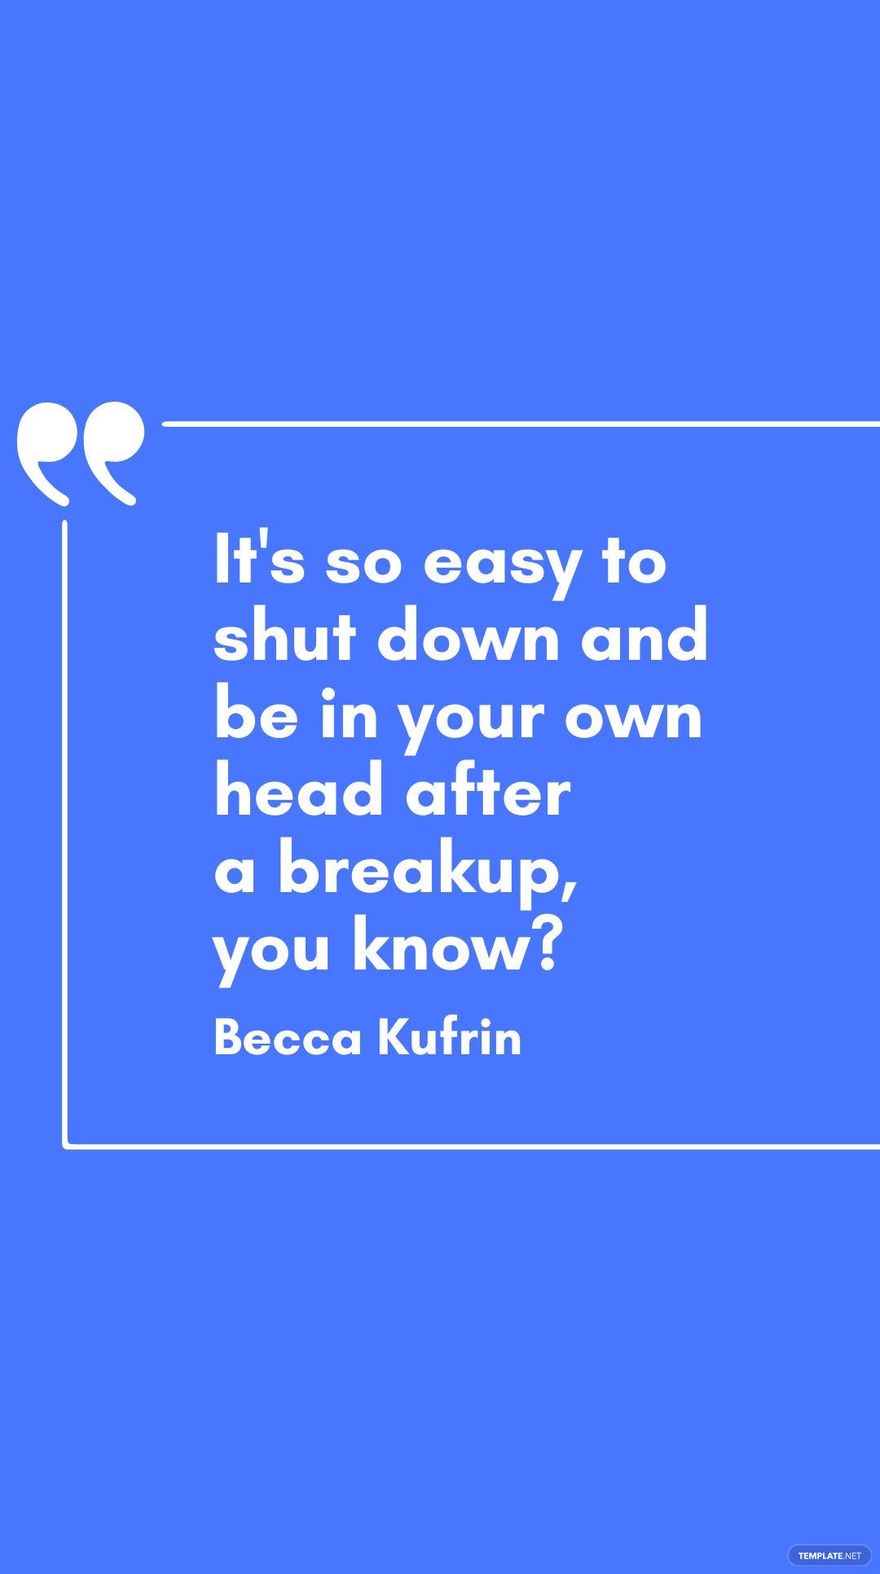 Becca Kufrin - It's so easy to shut down and be in your own head after a breakup, you know?